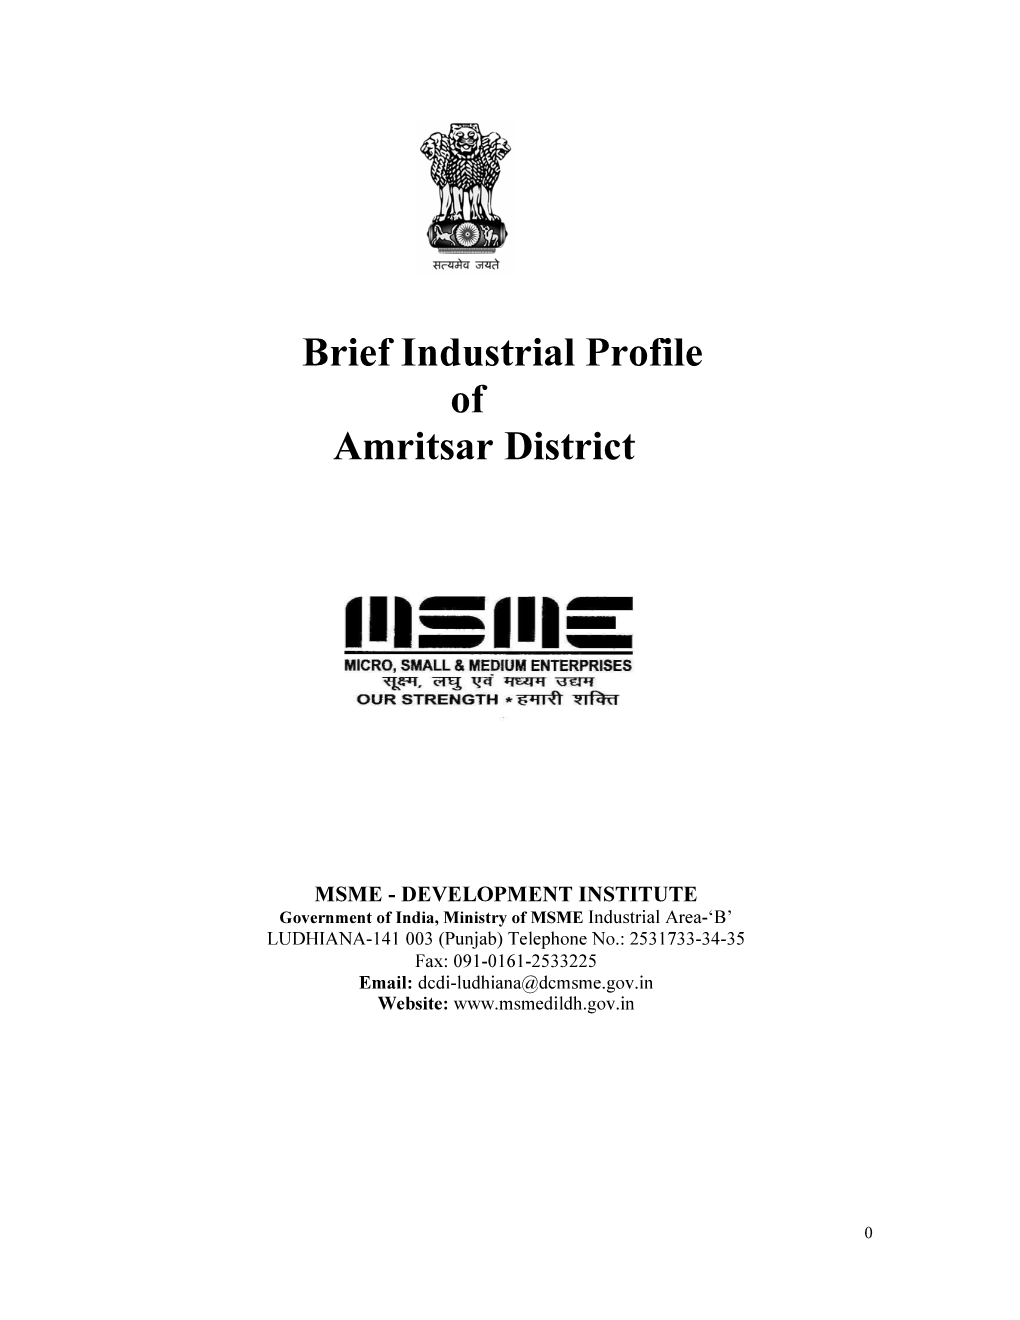 Brief Industrial Profile of Amritsar District